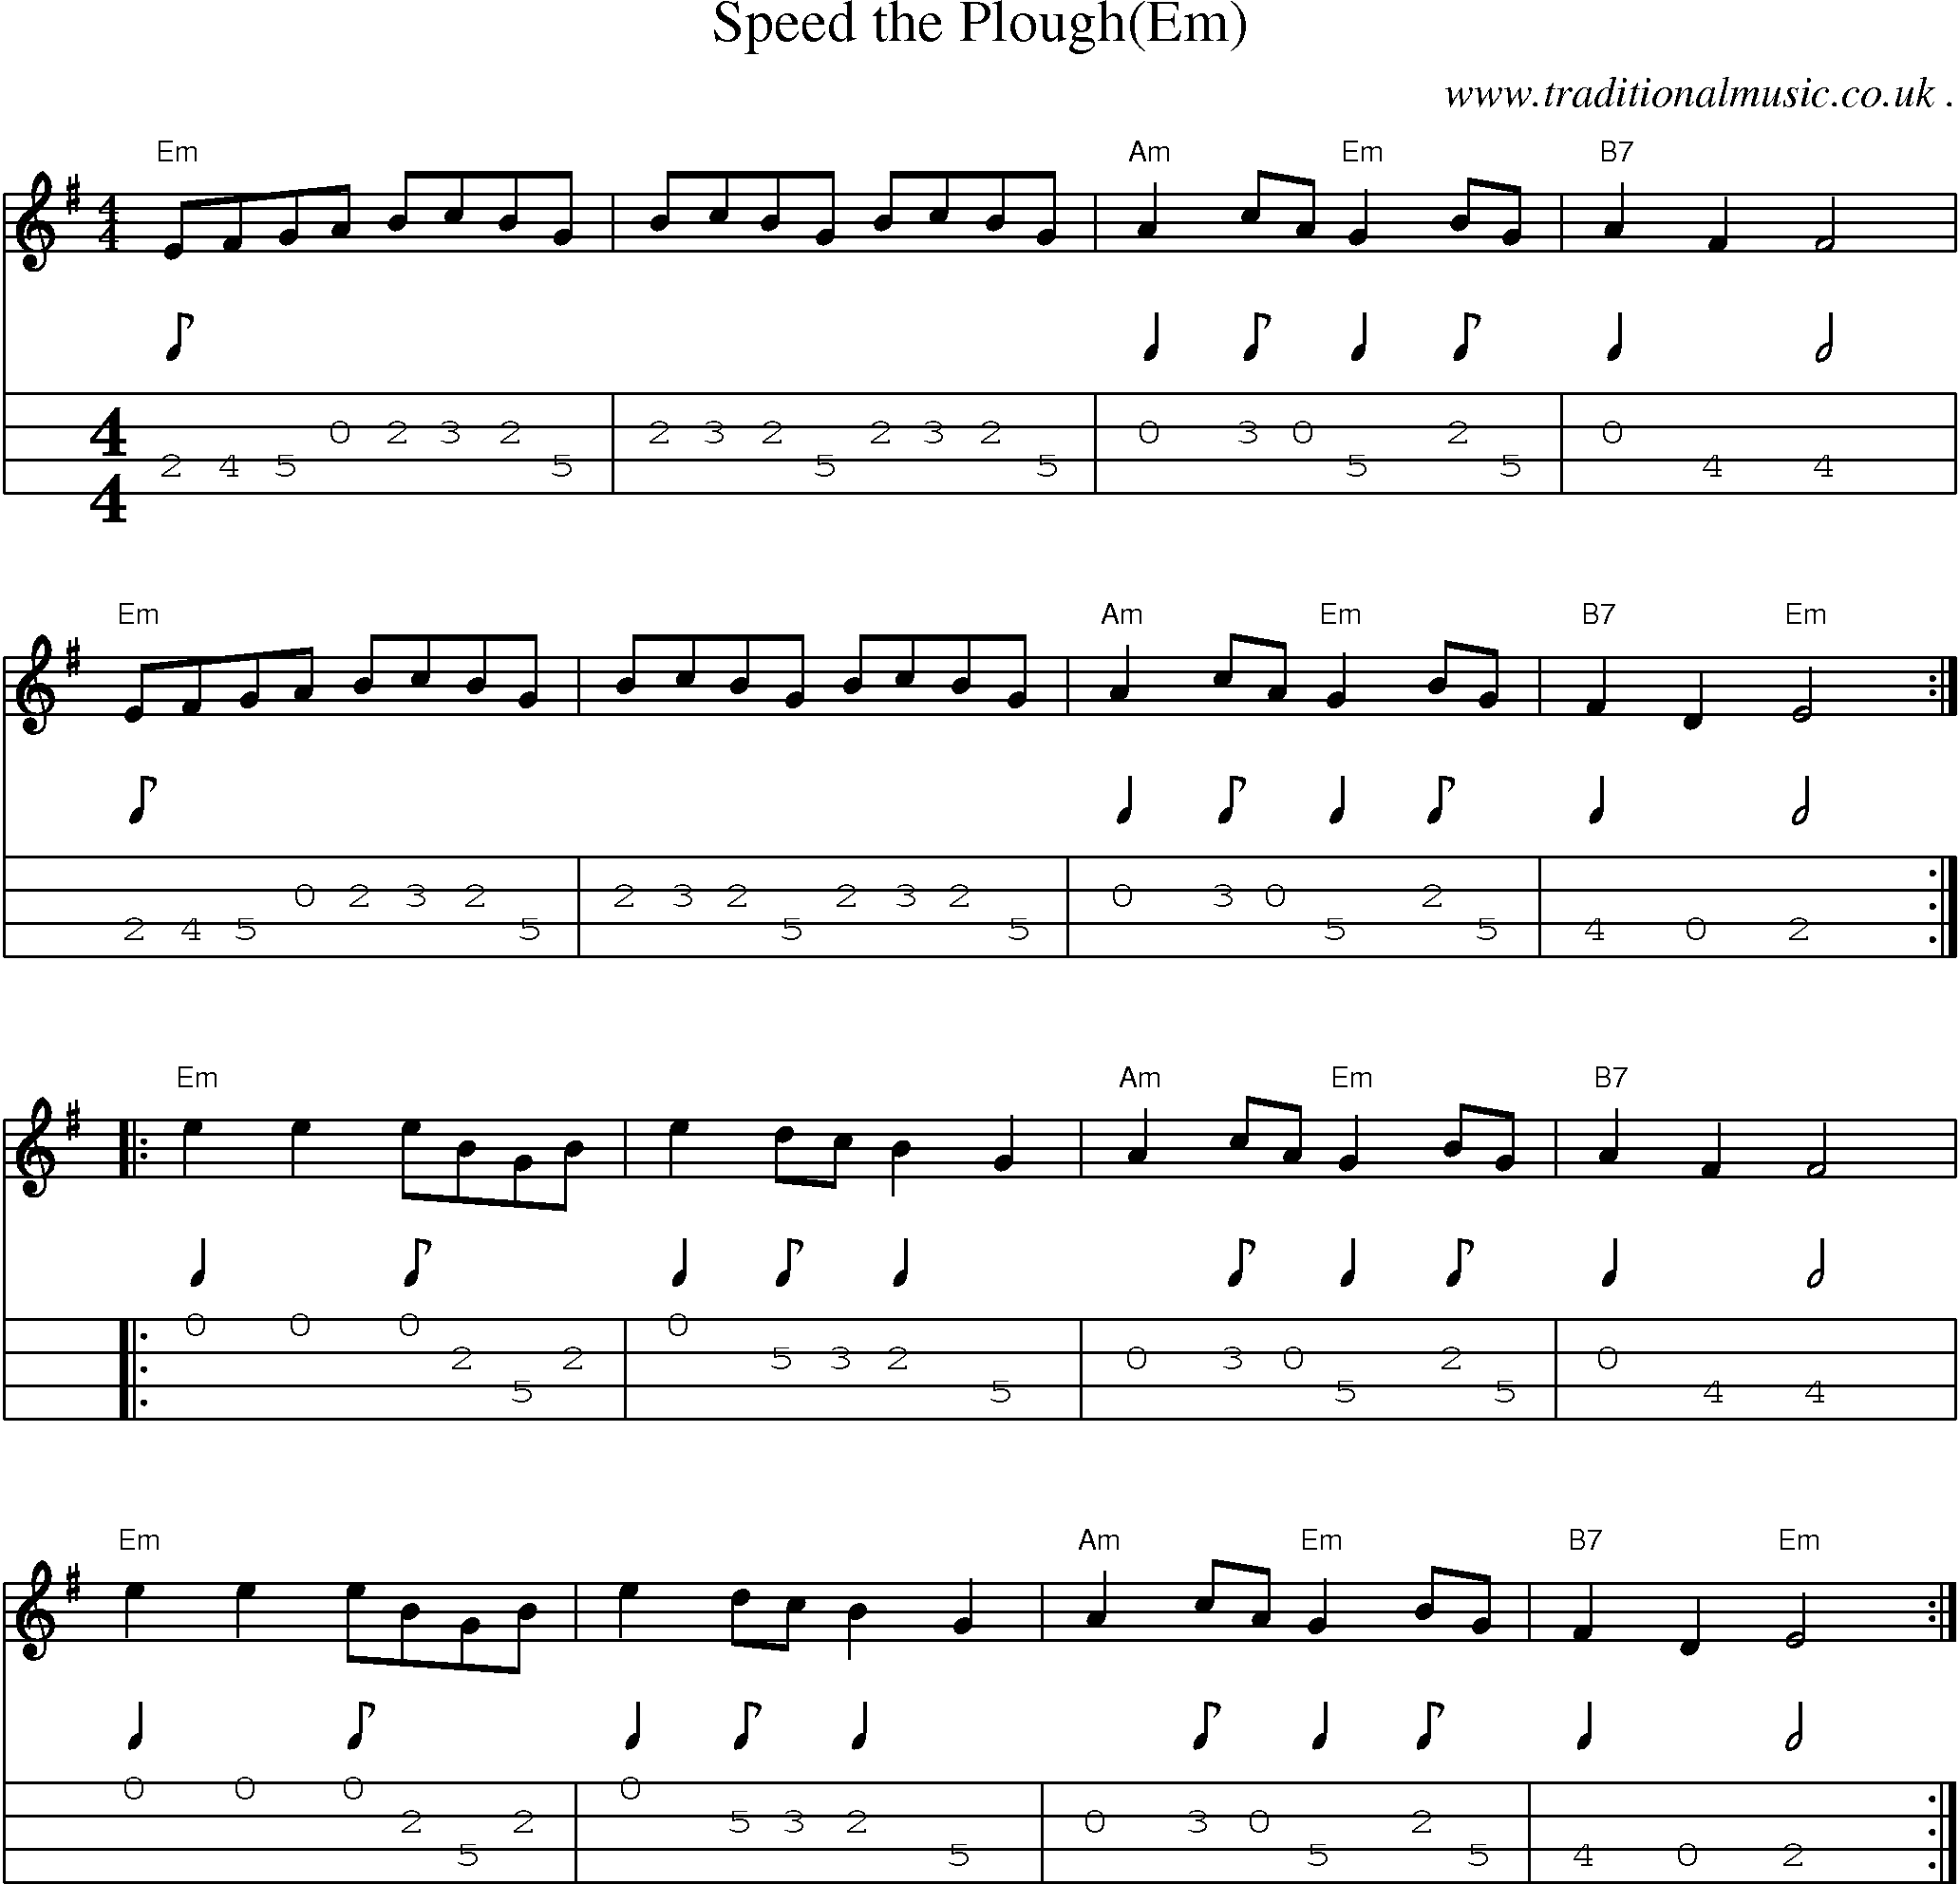 Music Score and Guitar Tabs for Speed the Plough(Em)